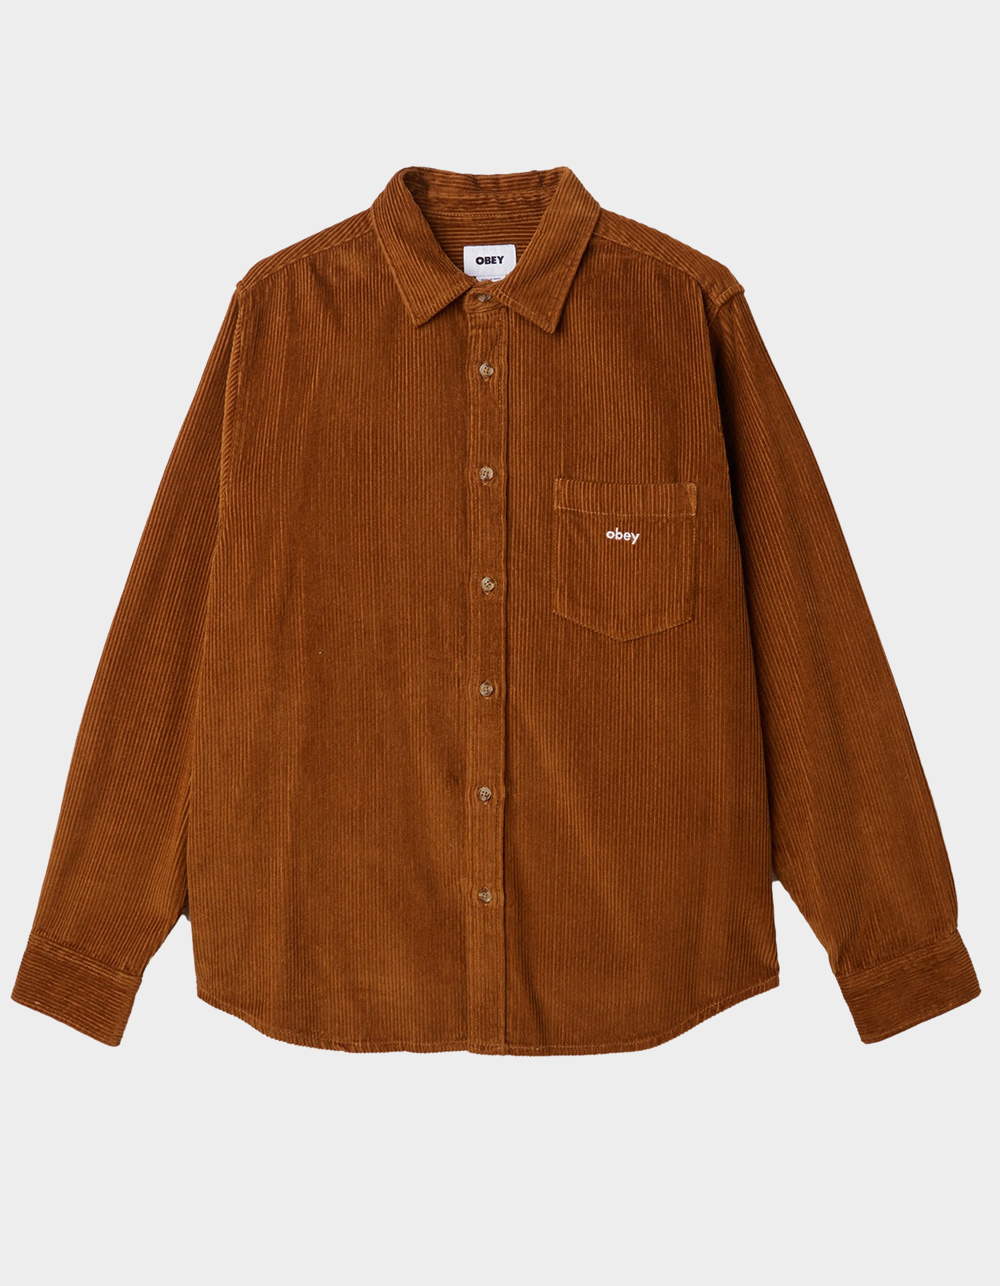 OBEY Miles Mens Woven Shirt